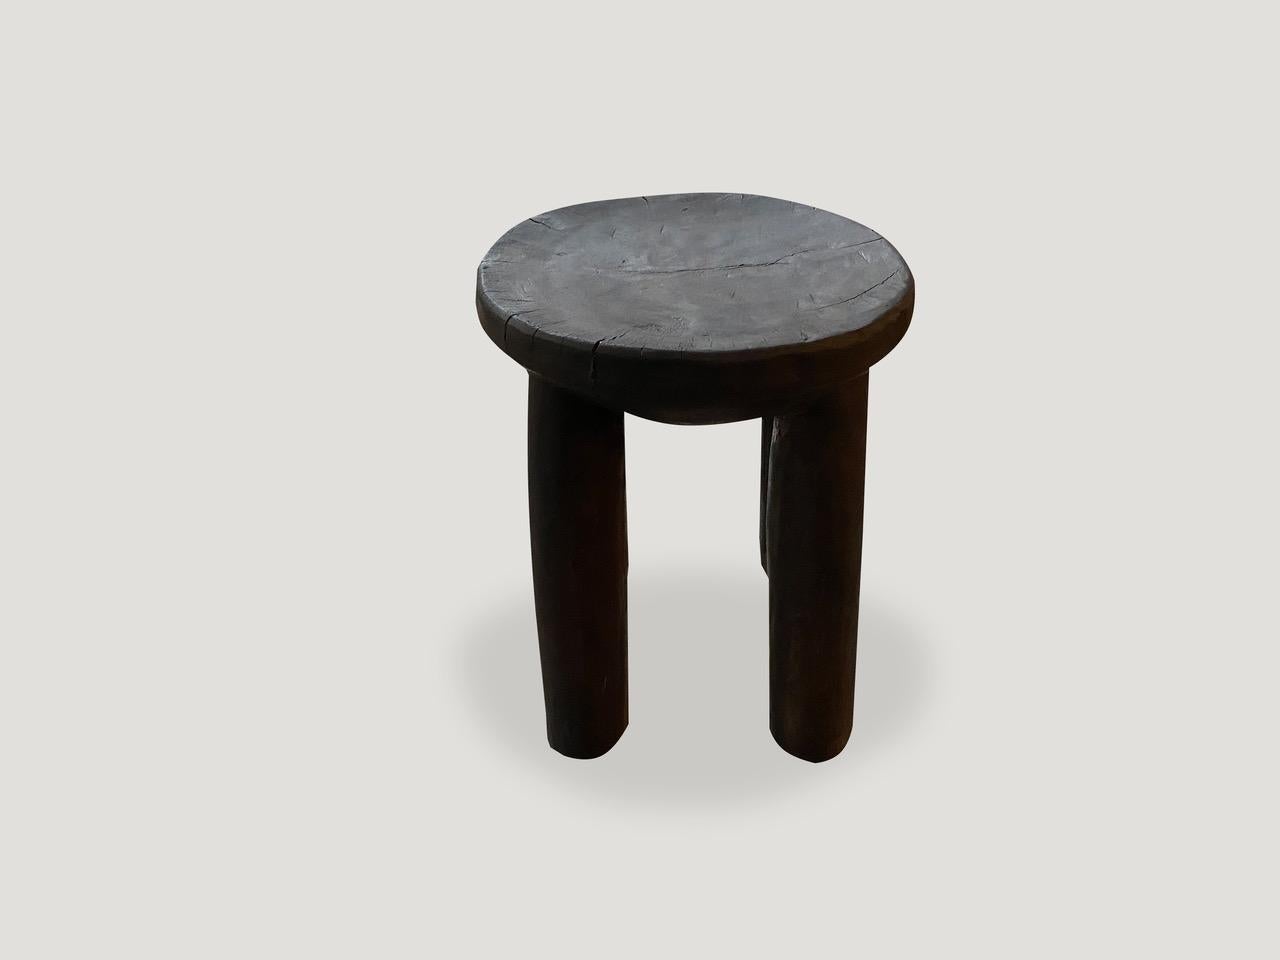 African mahogany stool or side table. Hand carved from a single piece of wood with a deep beveled top. Great for placing a book or perhaps towels in a bathroom, magazines etc. This stool or side table was sourced in the spirit of wabi-sabi, a